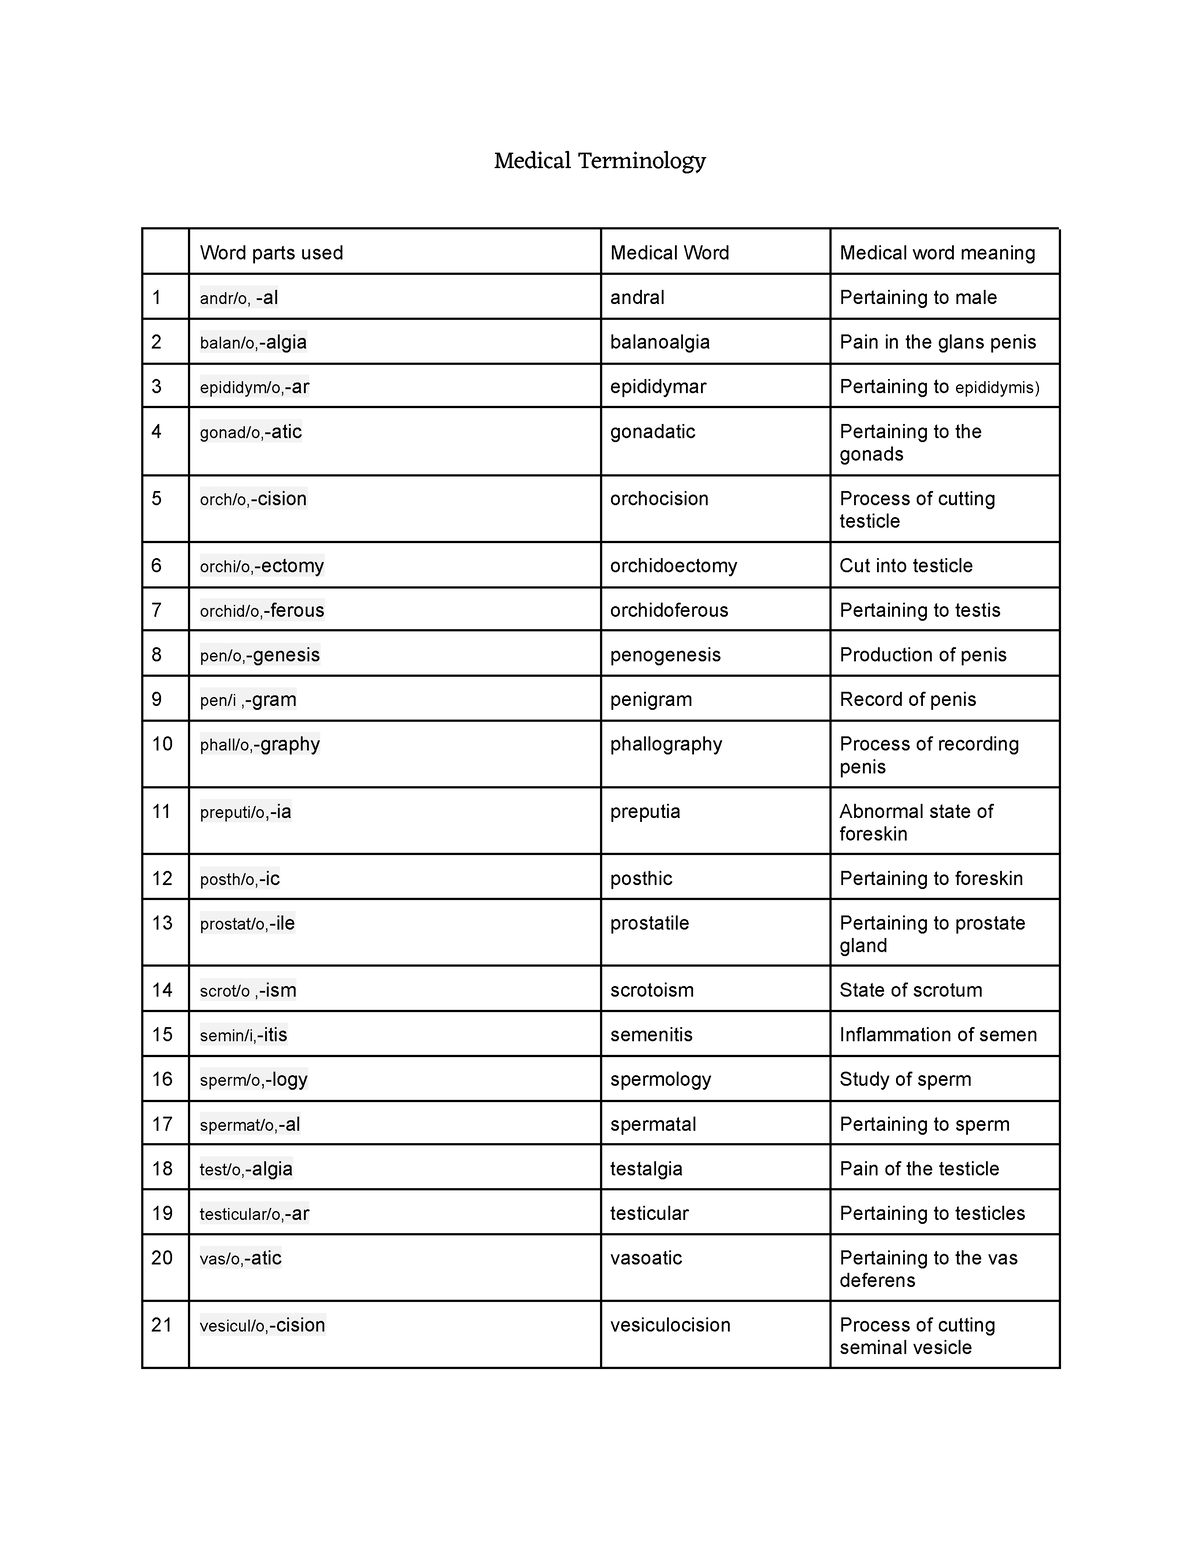 Medical Terminology Module 8 - Medical Terminology Word parts used ...